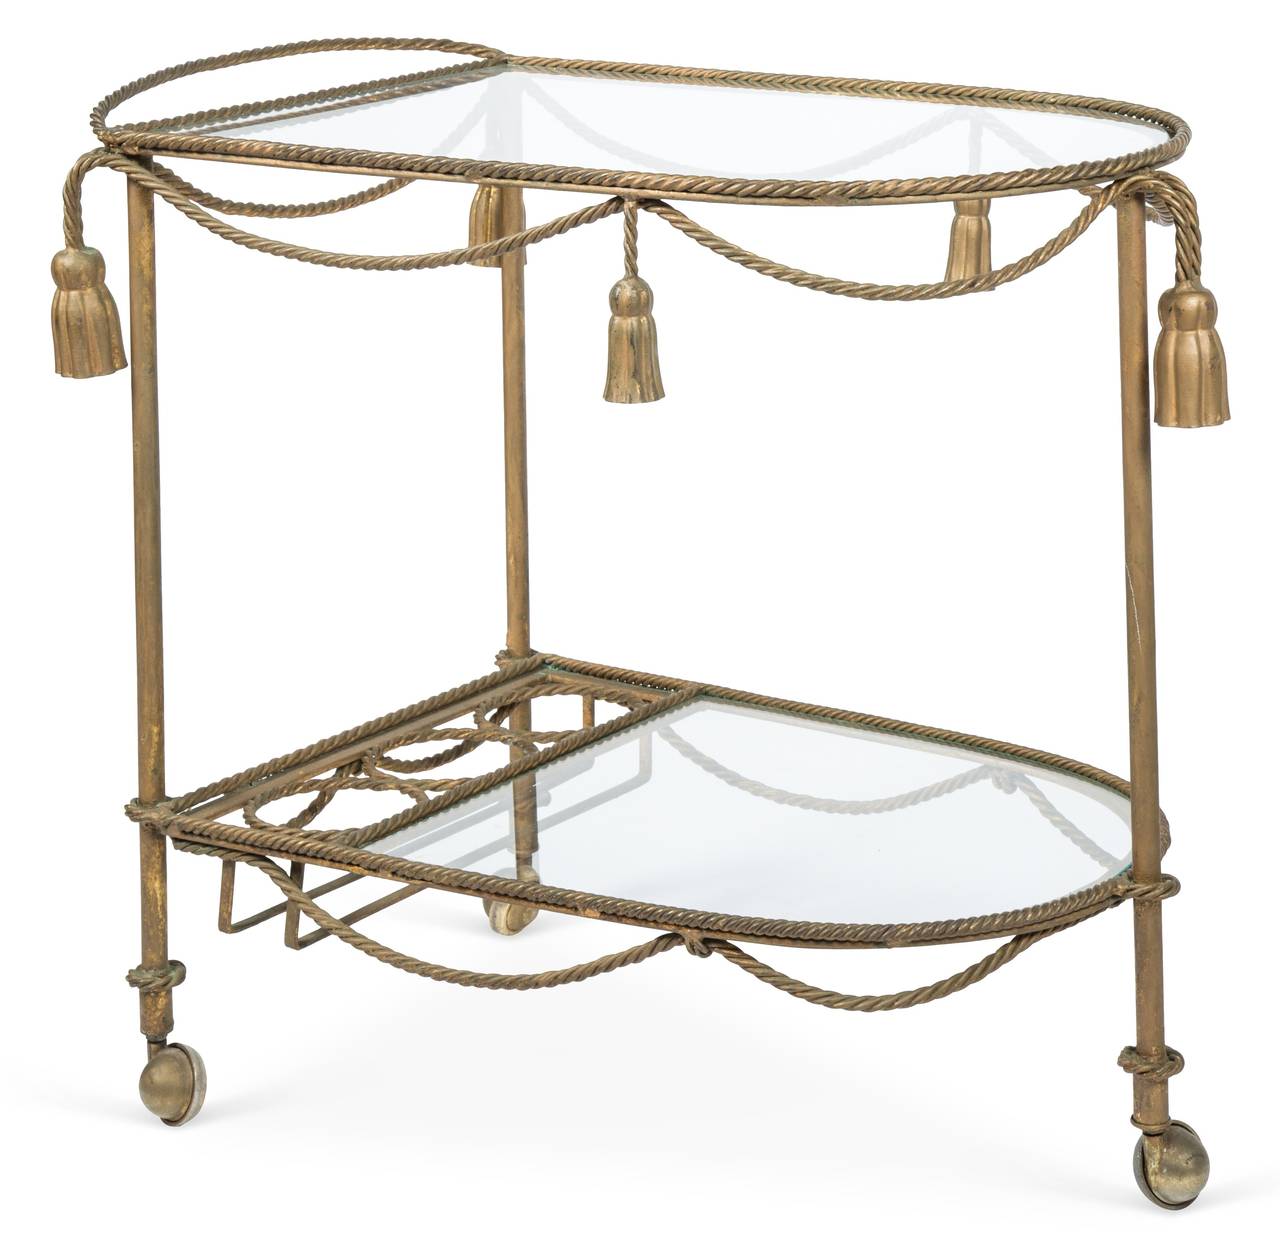 Hollywood Regency style gilt metal bar or tea serving cart featuring a tassel and rope design with two removable clear glass inserts and casters.